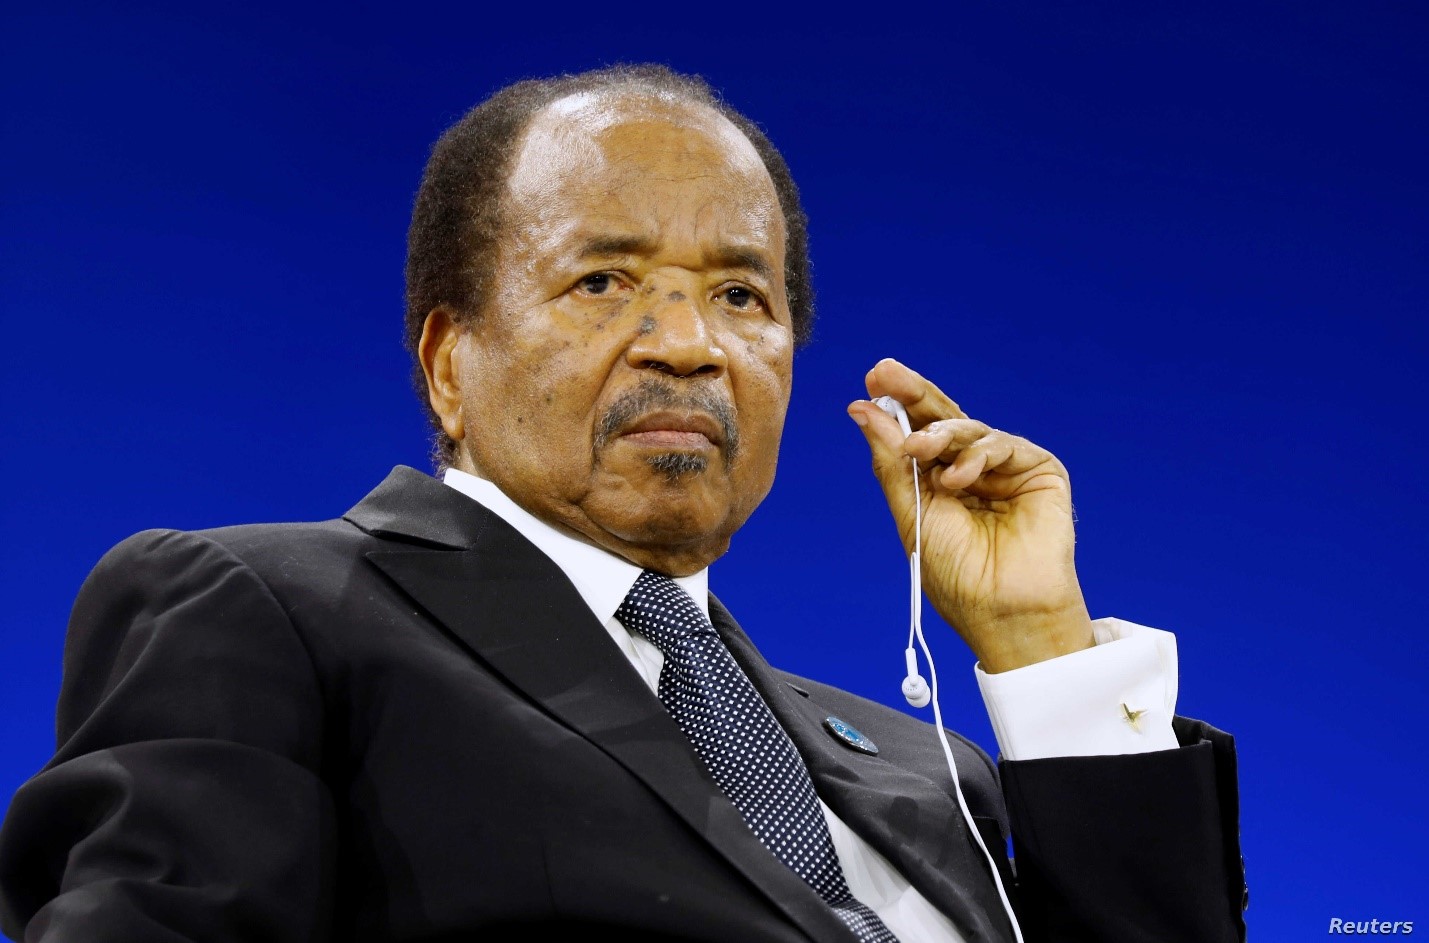 Many think that President Paul Biya, 87, has not shown sufficient good faith in seeking a lasting solution to the crisis